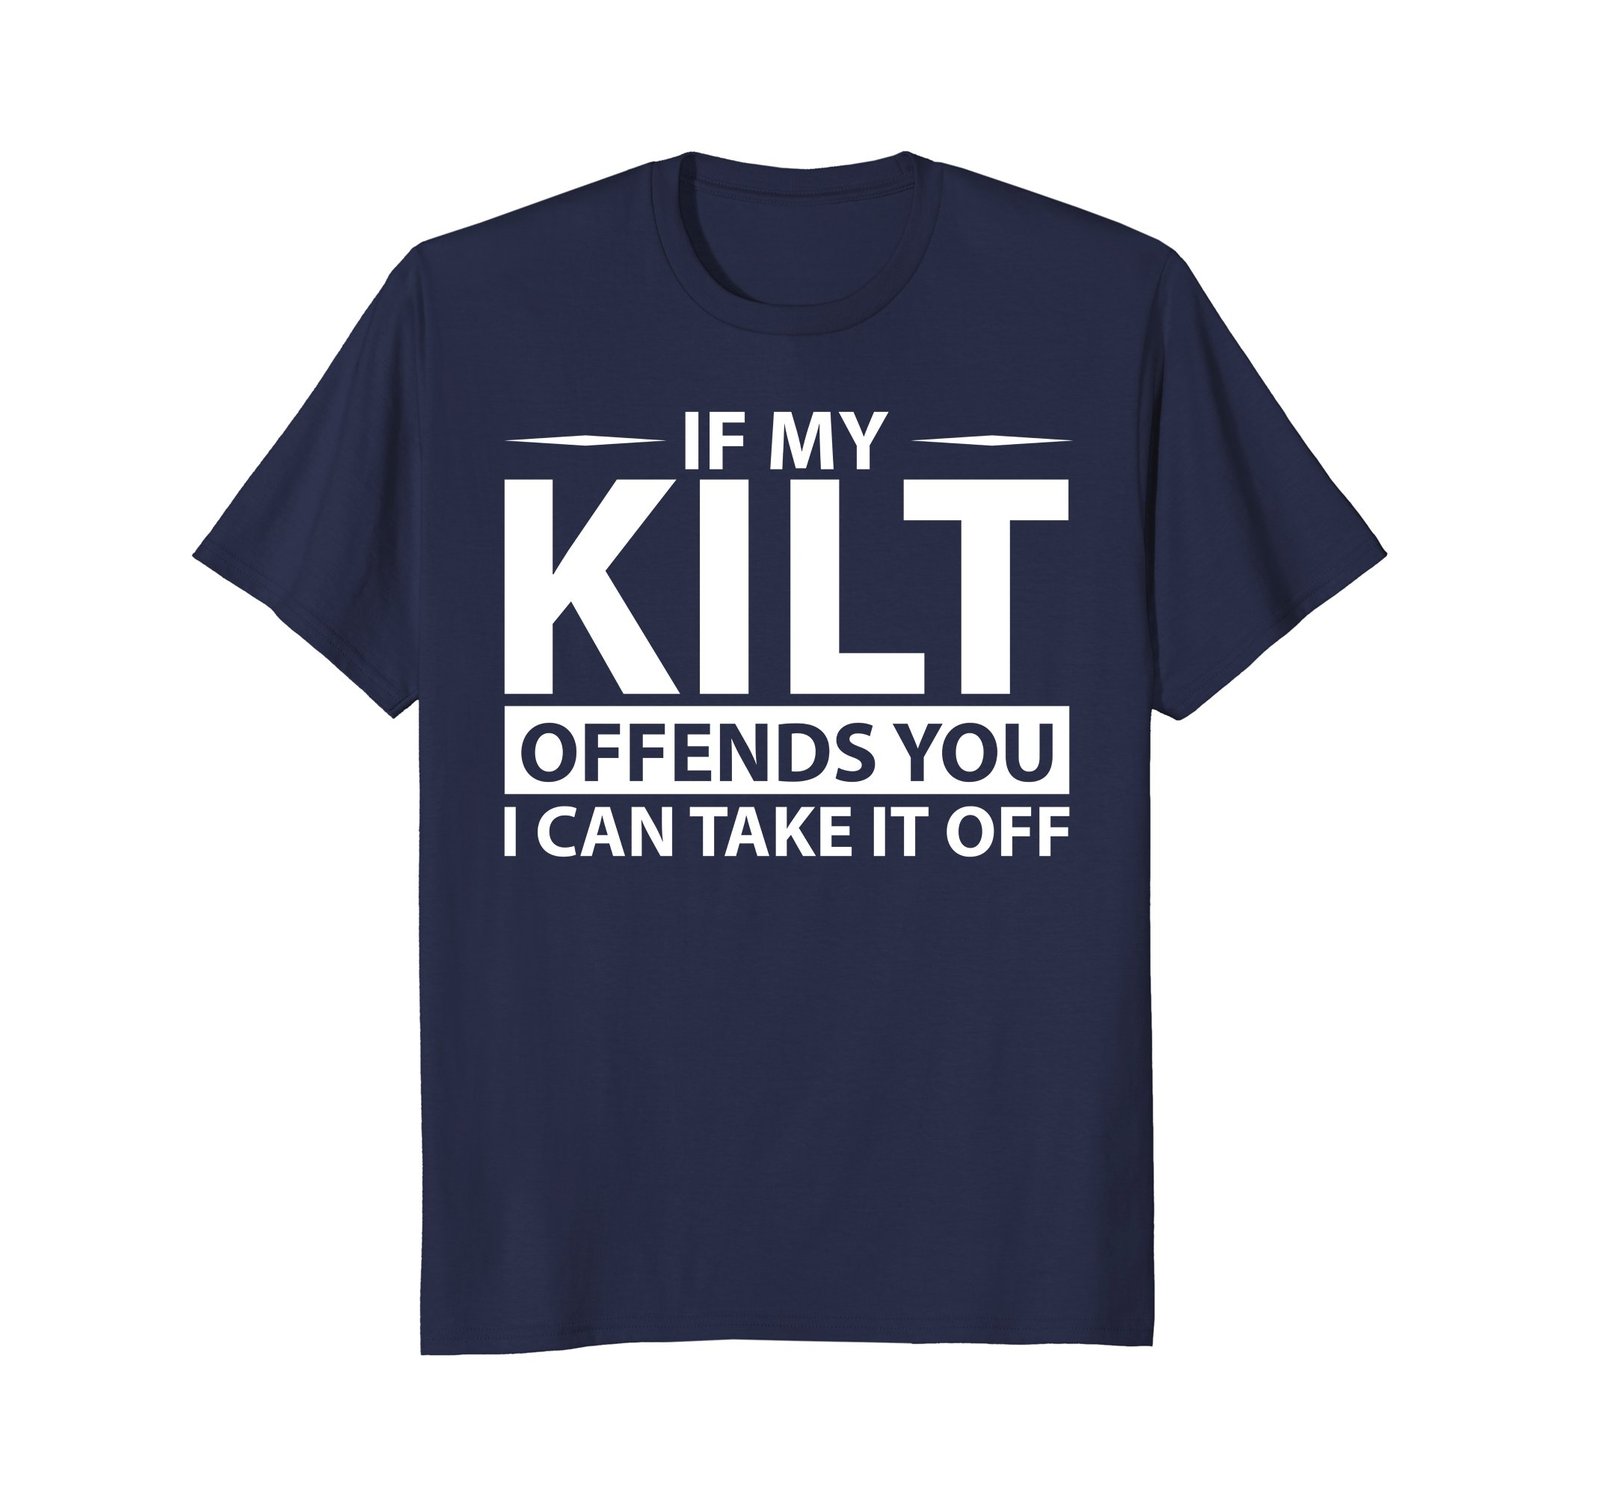 Funny Shirts - If My Kilt Offends You T-Shirt Funny St. Patrick's Day Men